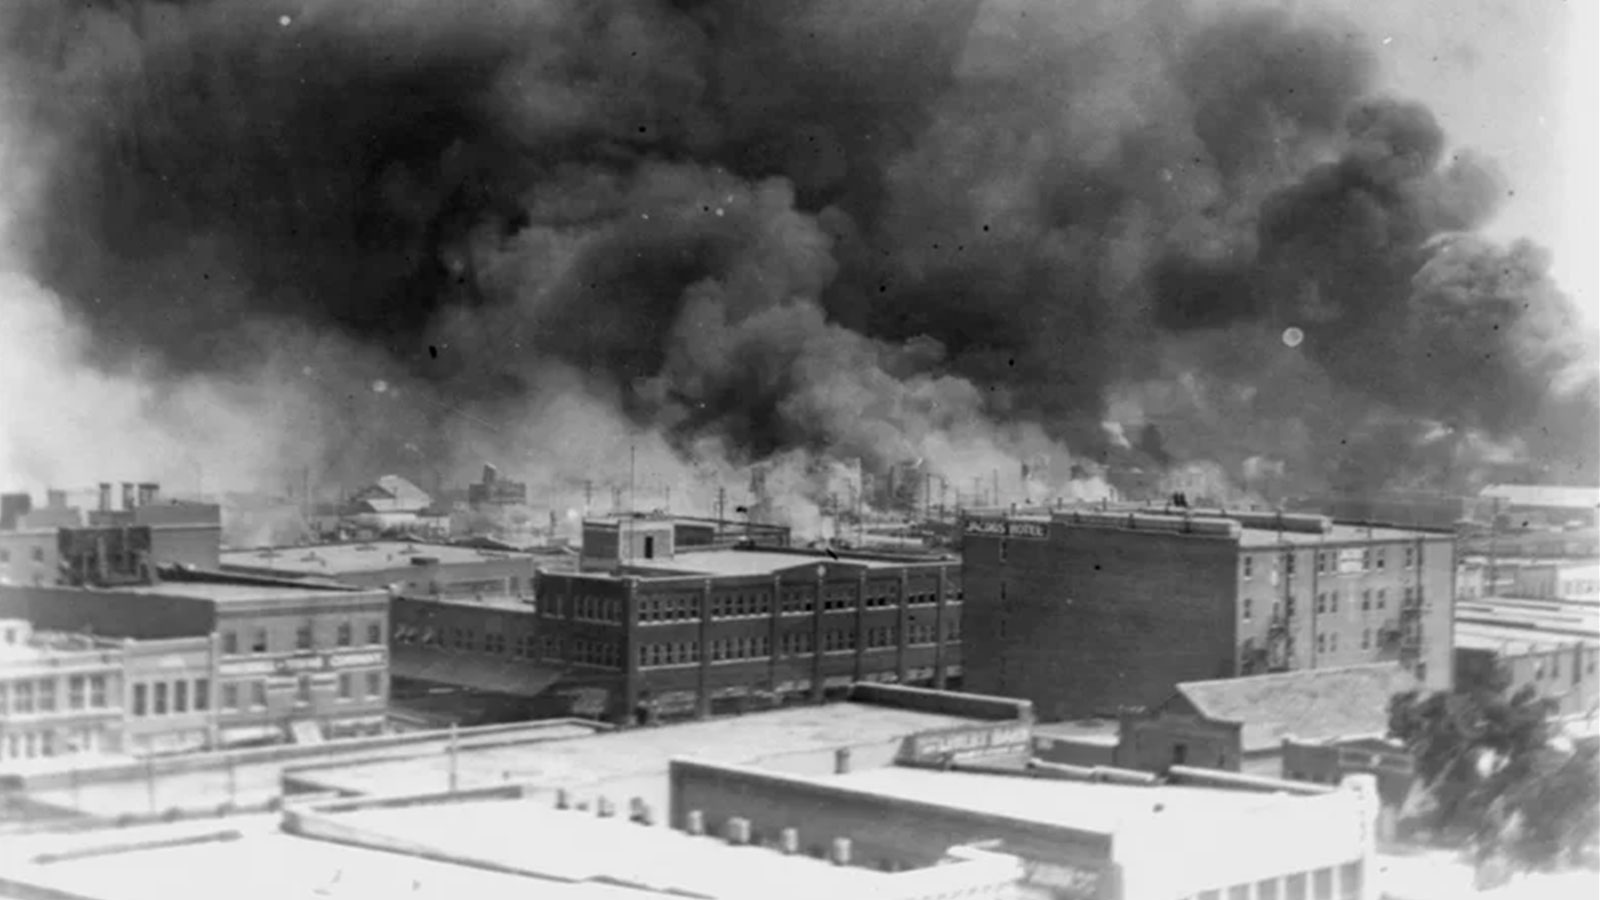 In this 1921 image provided by the Library of Congress, smoke billows over Tulsa, Okla., following the killing of hundreds of people in "Black Wall Street" in the city's prosperous Greenwood enclave.